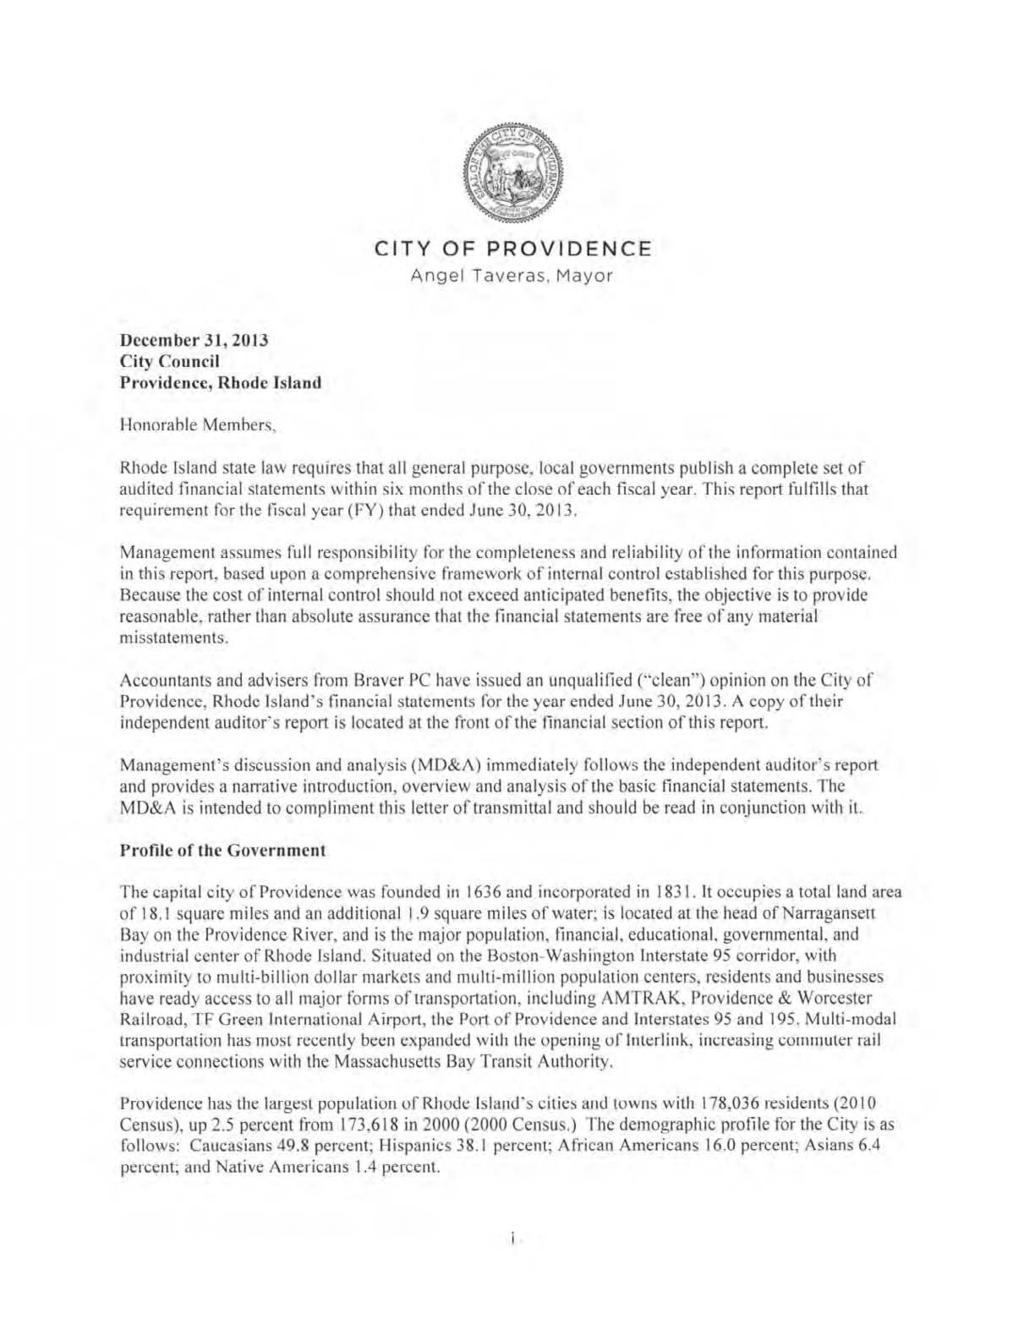 CITY OF PROVIDENCE Angel Taveras, Mayor December 31, 2013 City Council Providence, Rhode Island Honorable Members, Rhode Island state law requires that all general purpose, local governments publish